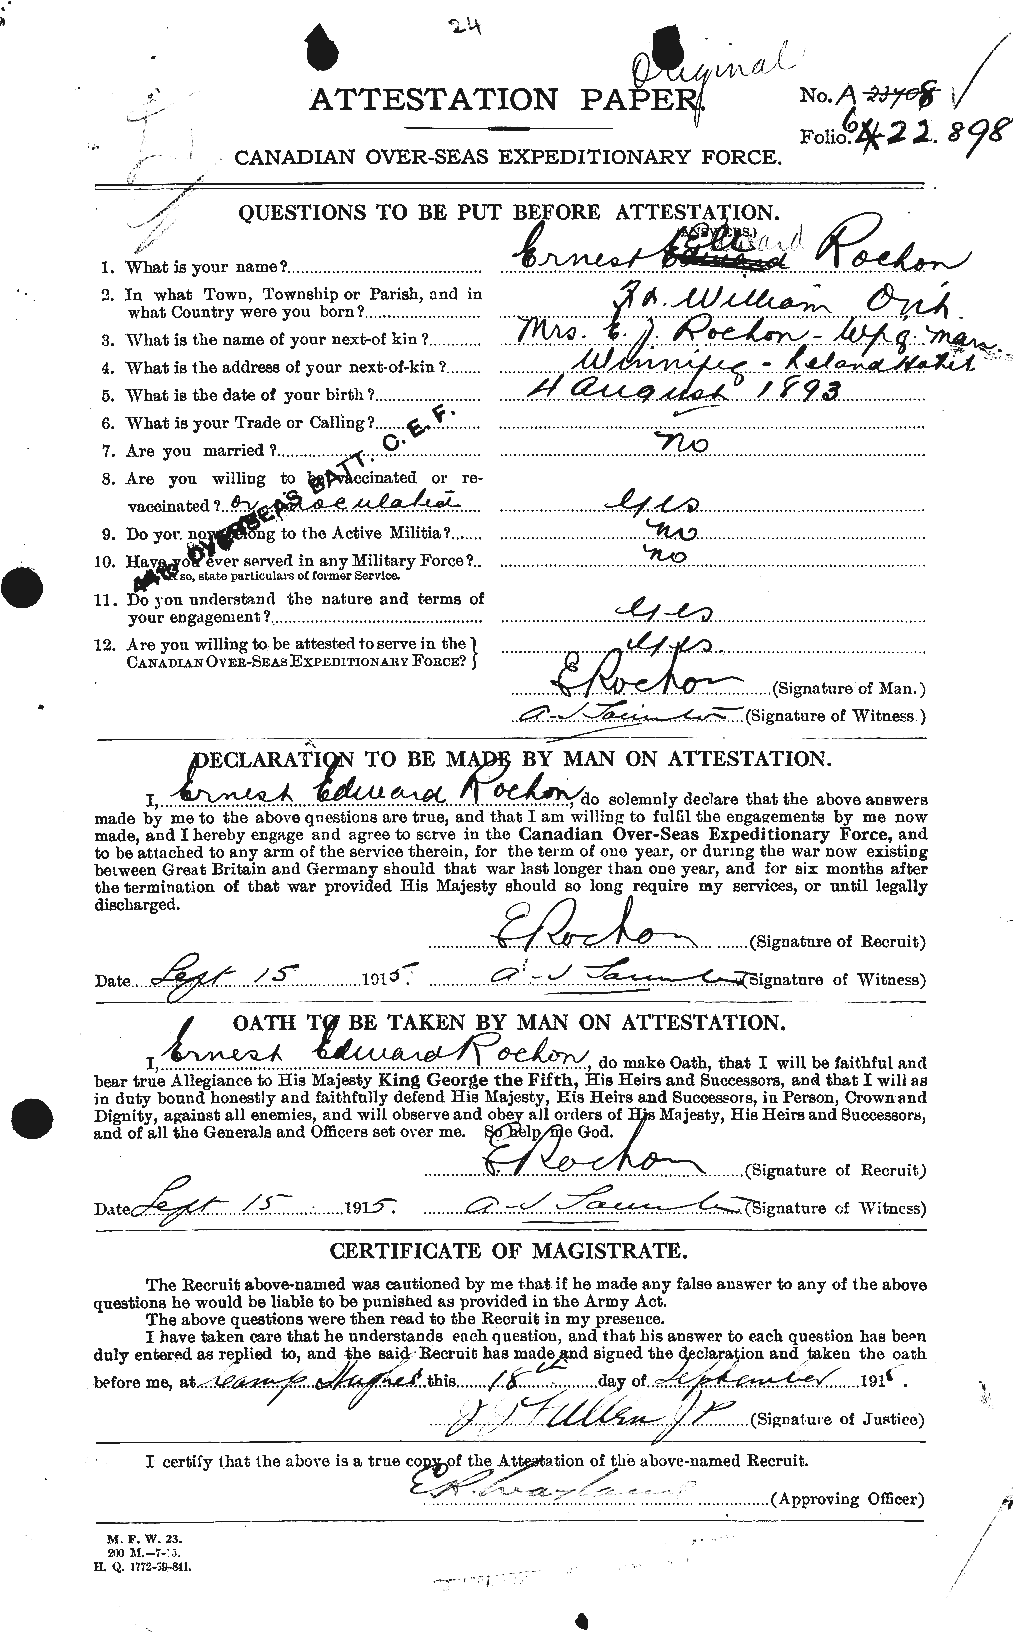 Personnel Records of the First World War - CEF 609049a